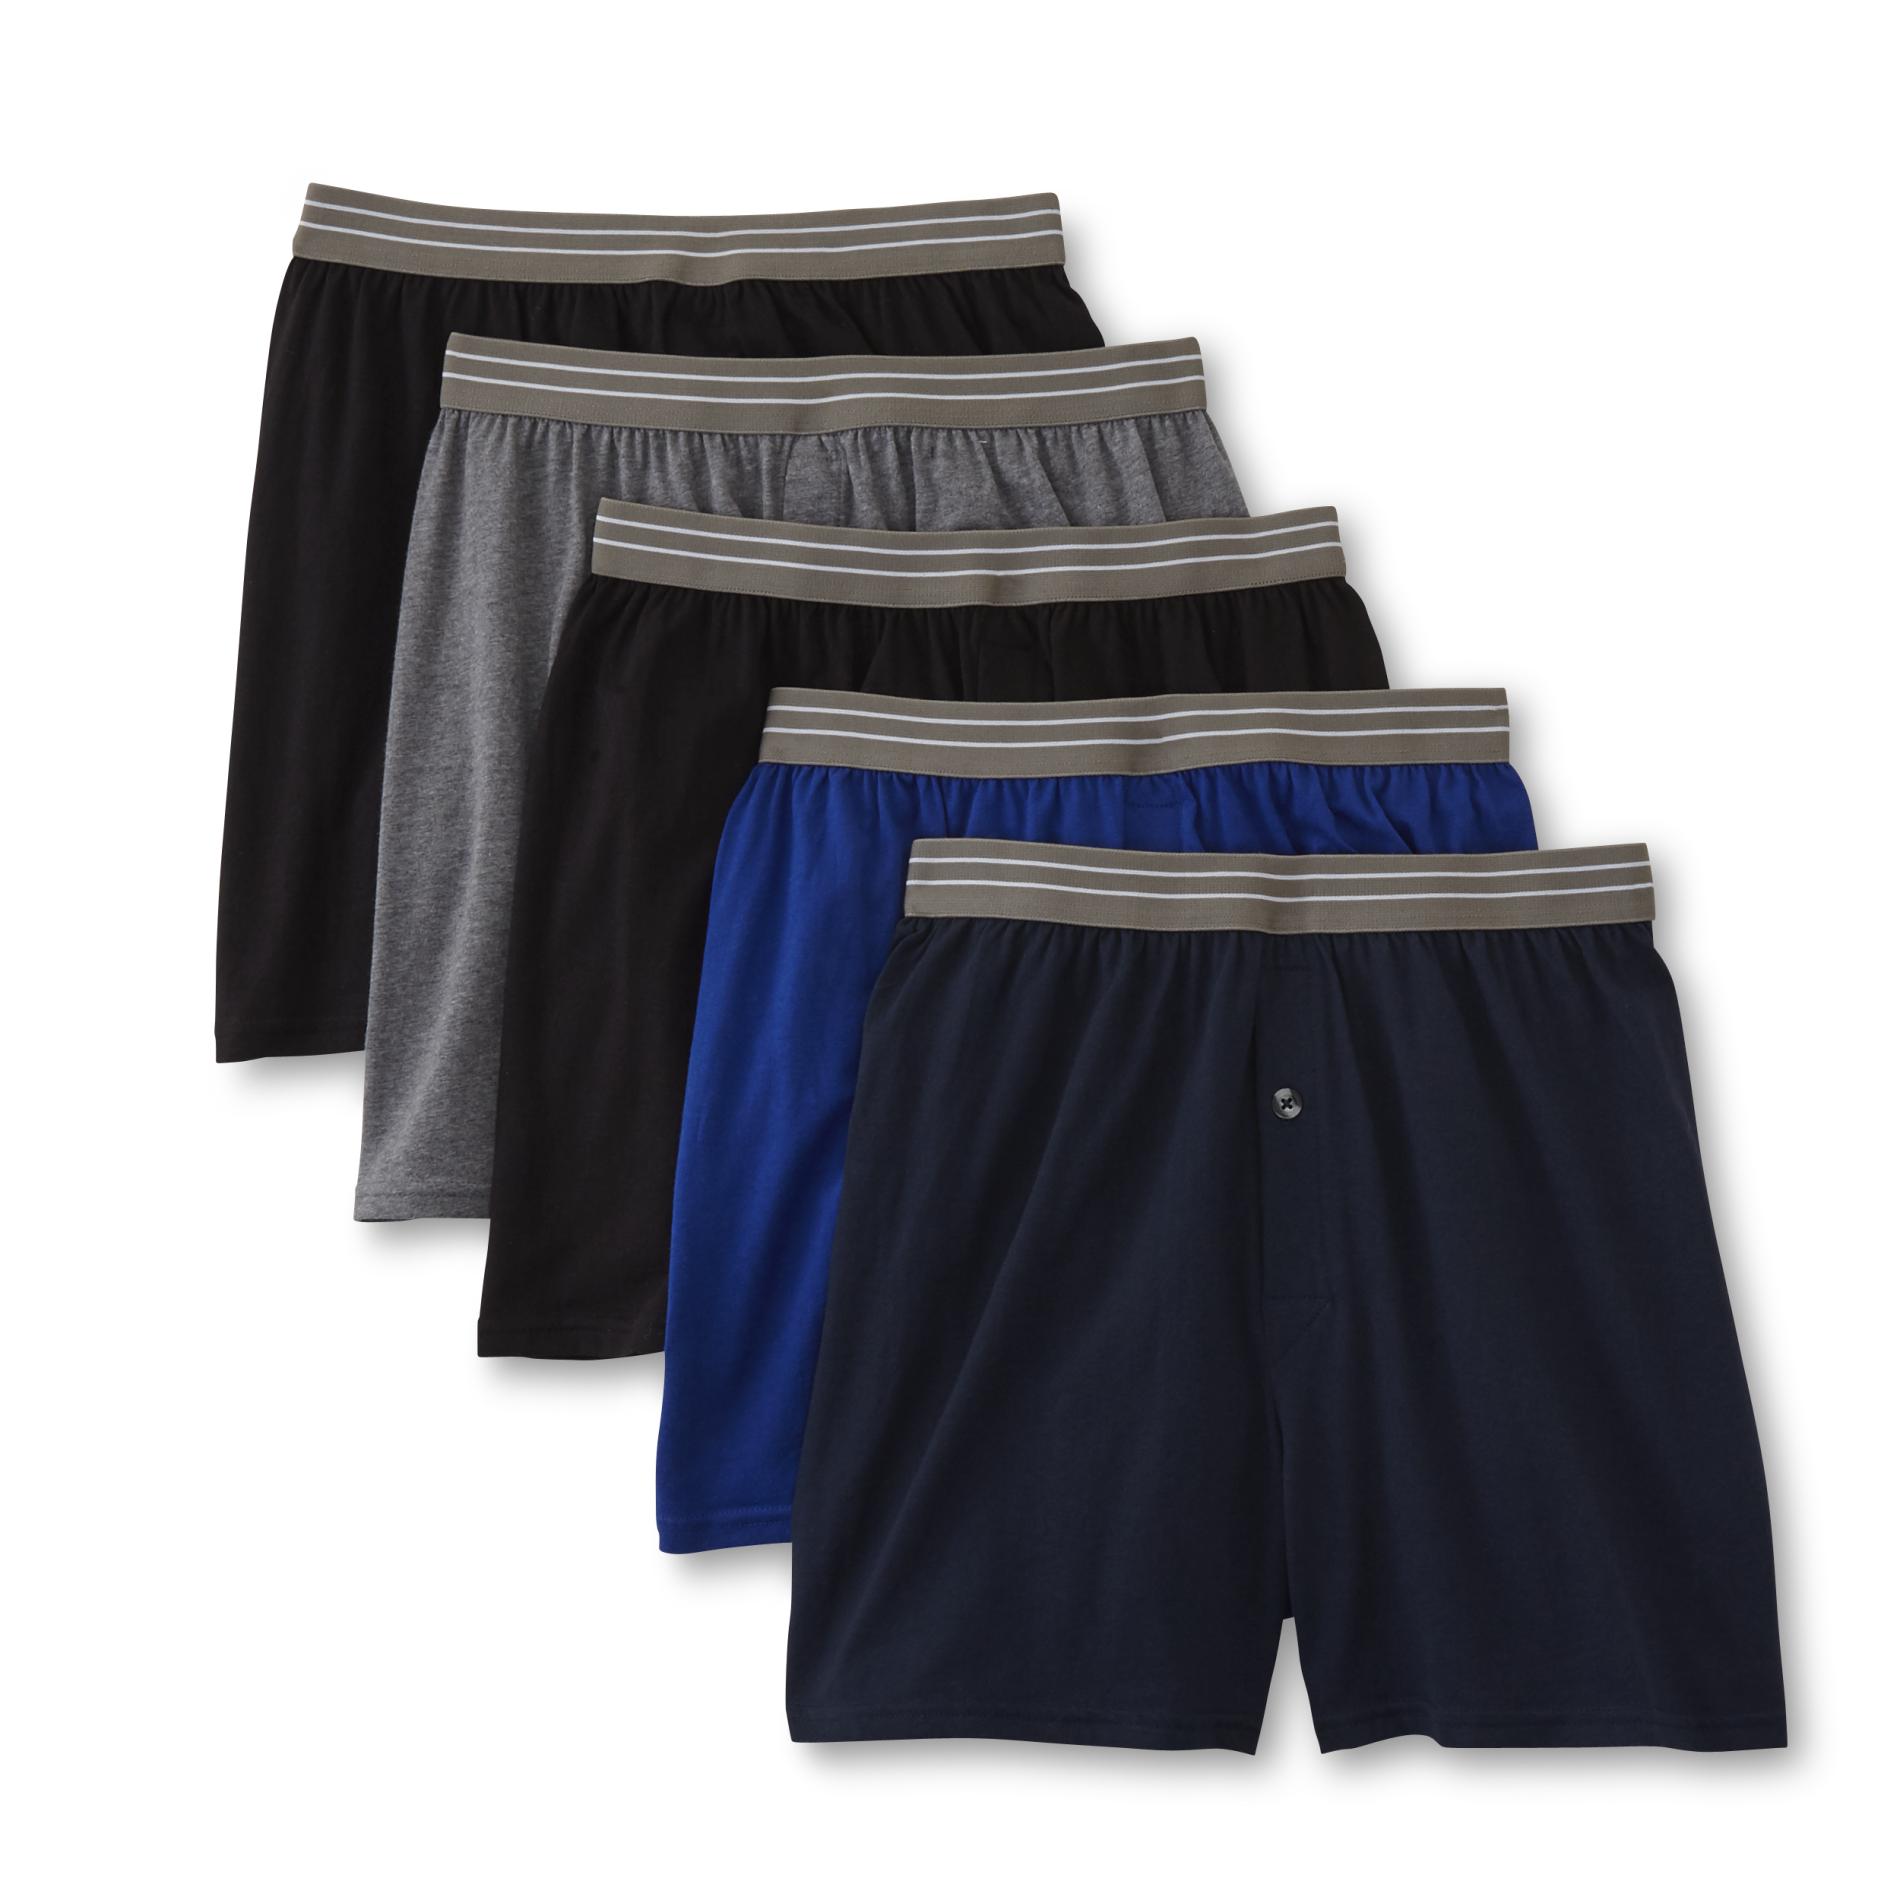 Simply Styled Men's 5-Pack Boxers